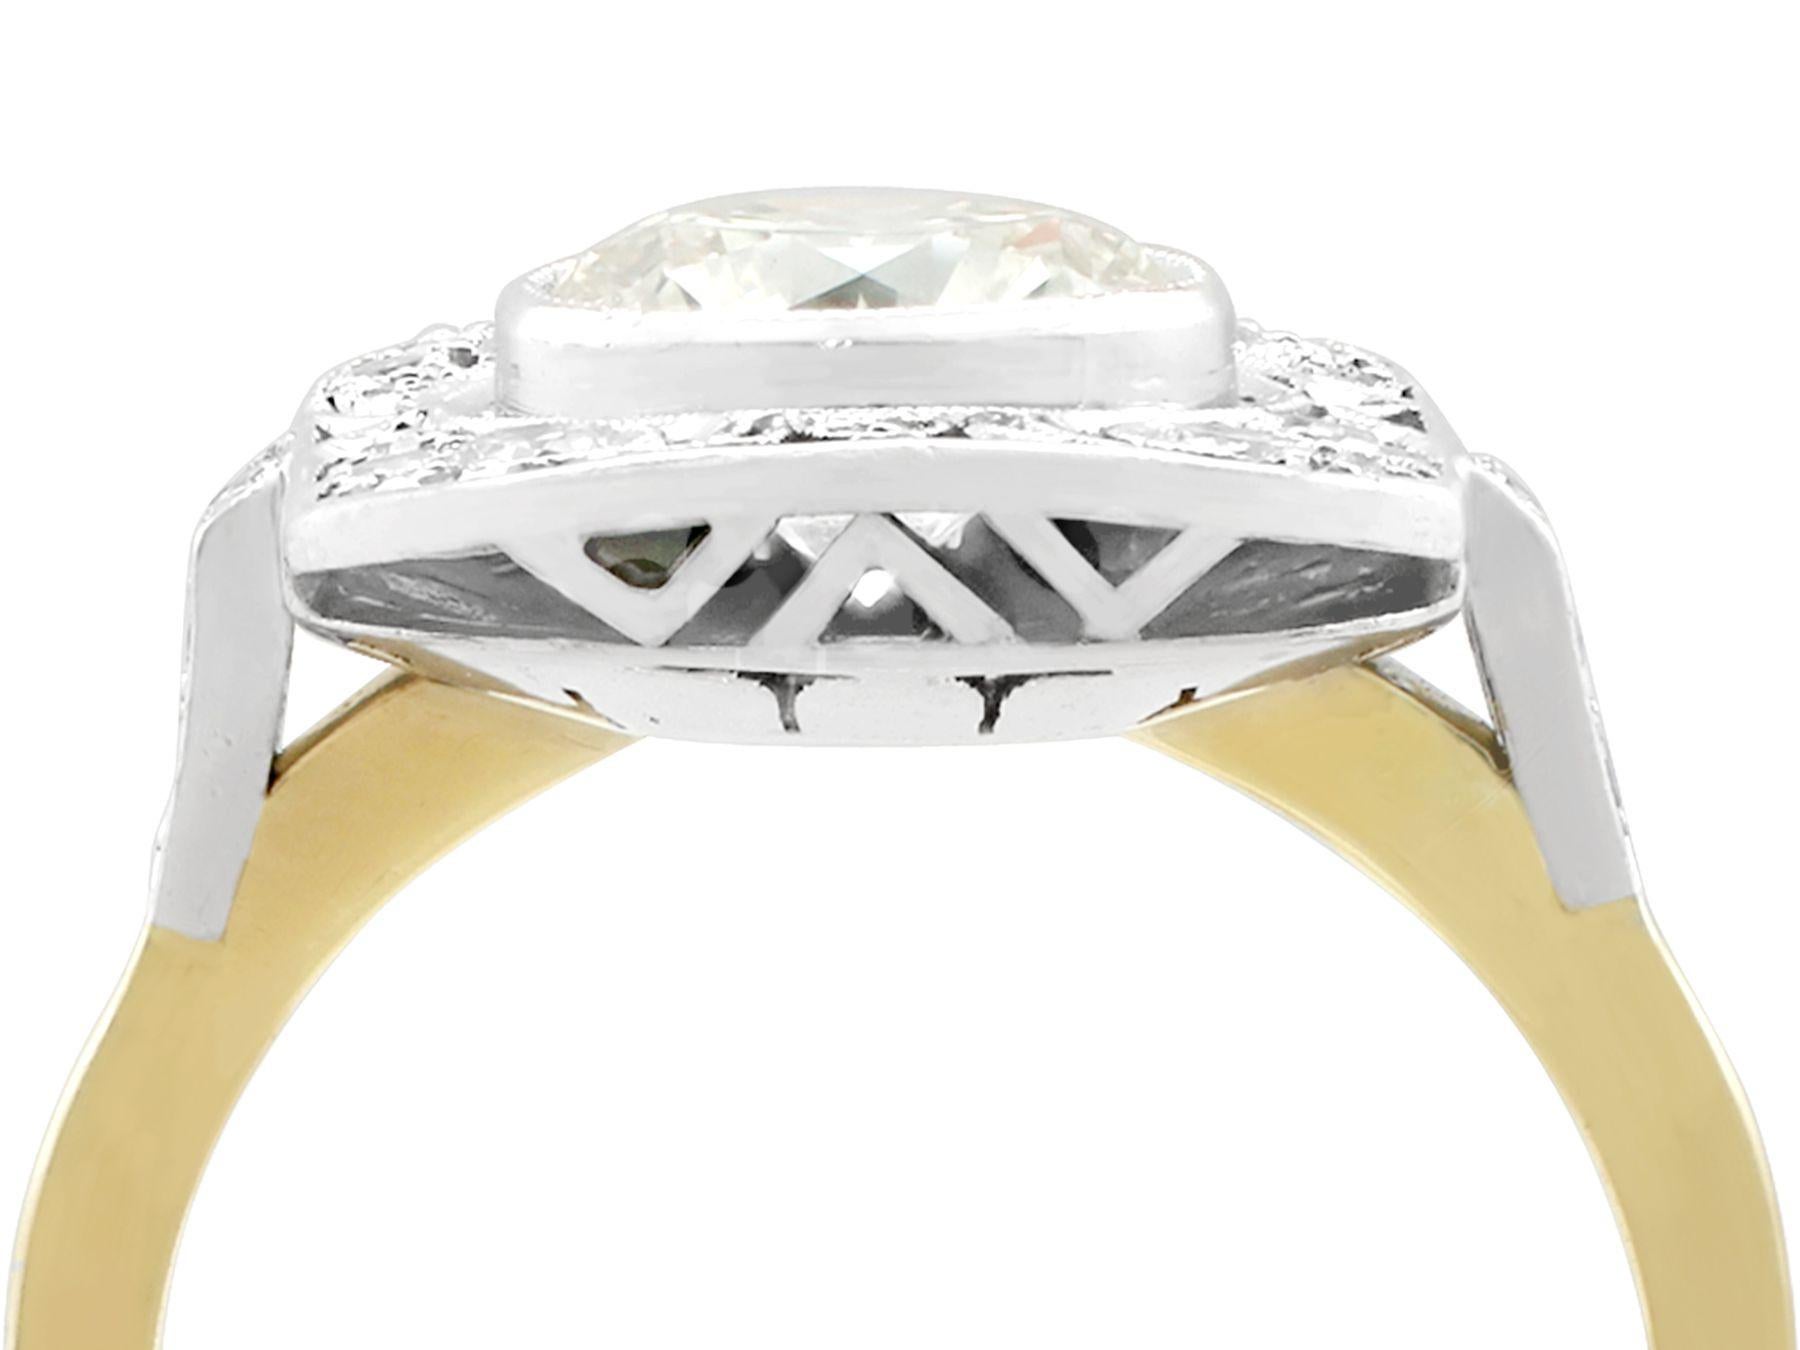 A stunning antique 1950s 2.08 carat diamond and 14k yellow gold, 14k white gold set dress ring; part of our diverse diamond jewelry collections.

This stunning, fine and impressive Art Deco style diamond ring has been crafted in 14k yellow gold with